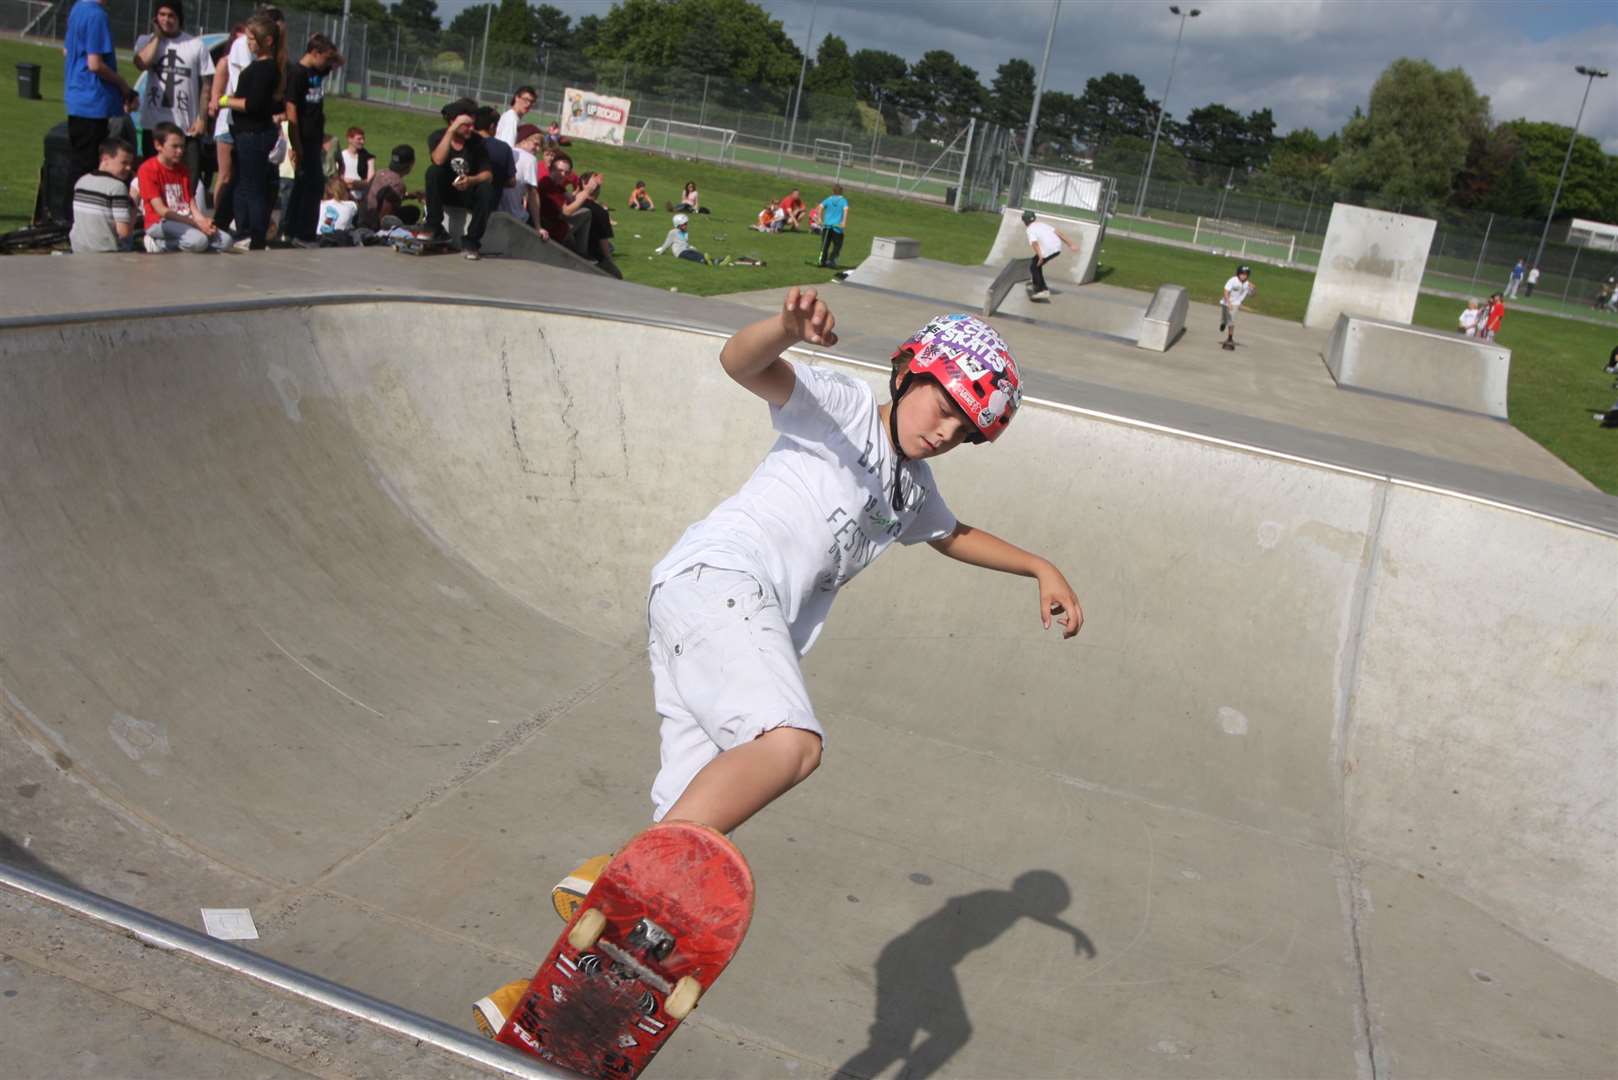 A skateboarding contest at the park in 2011